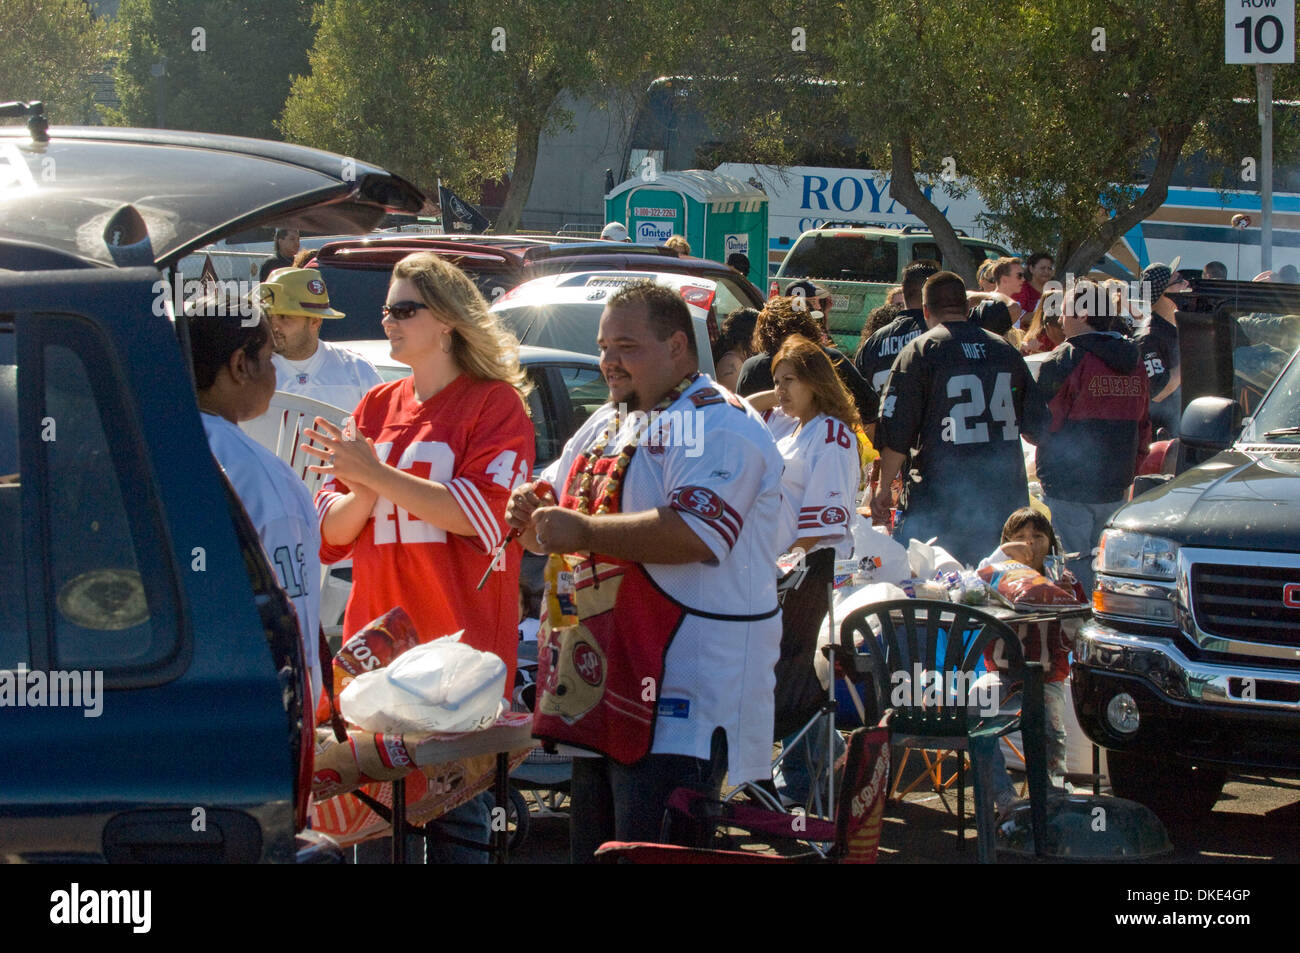 Aug.18, 2007 - San Francisco, California, U.S. - San Francisco 49ers vs Oakland Raiders at Bill Walsh field. Tailgate activities in parking lot before game.  Some families of both Niner and Raider fans seem to have fun with out making a big commotion. (Credit: © Al Golub/ZUMApress.com) Stock Photo